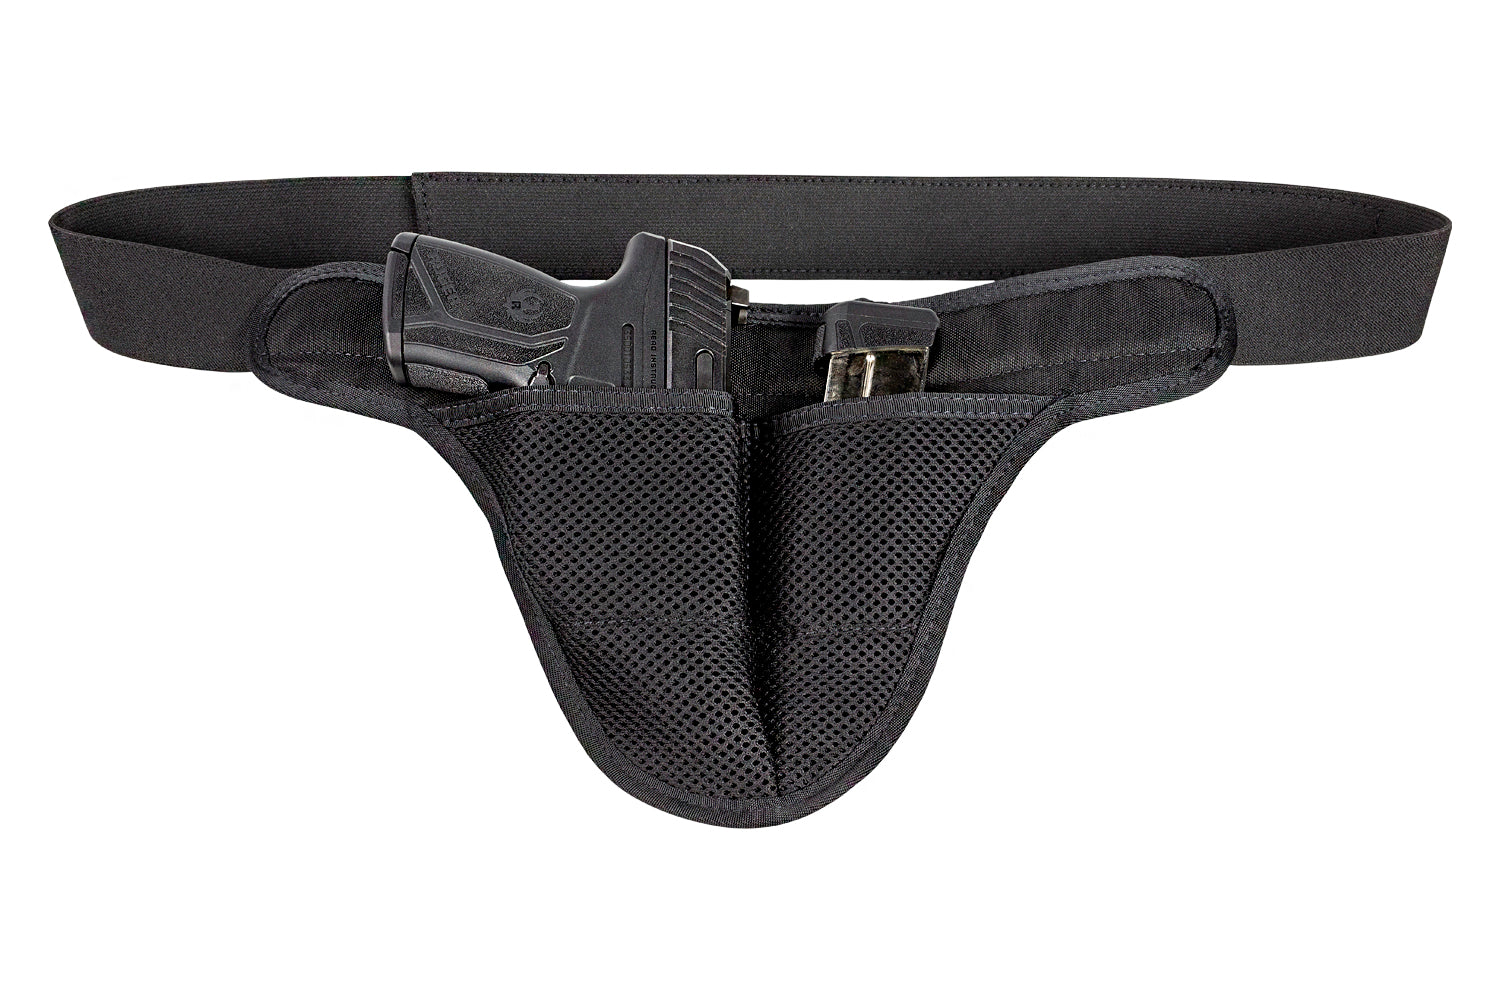 Elite Crotch Carry Holster